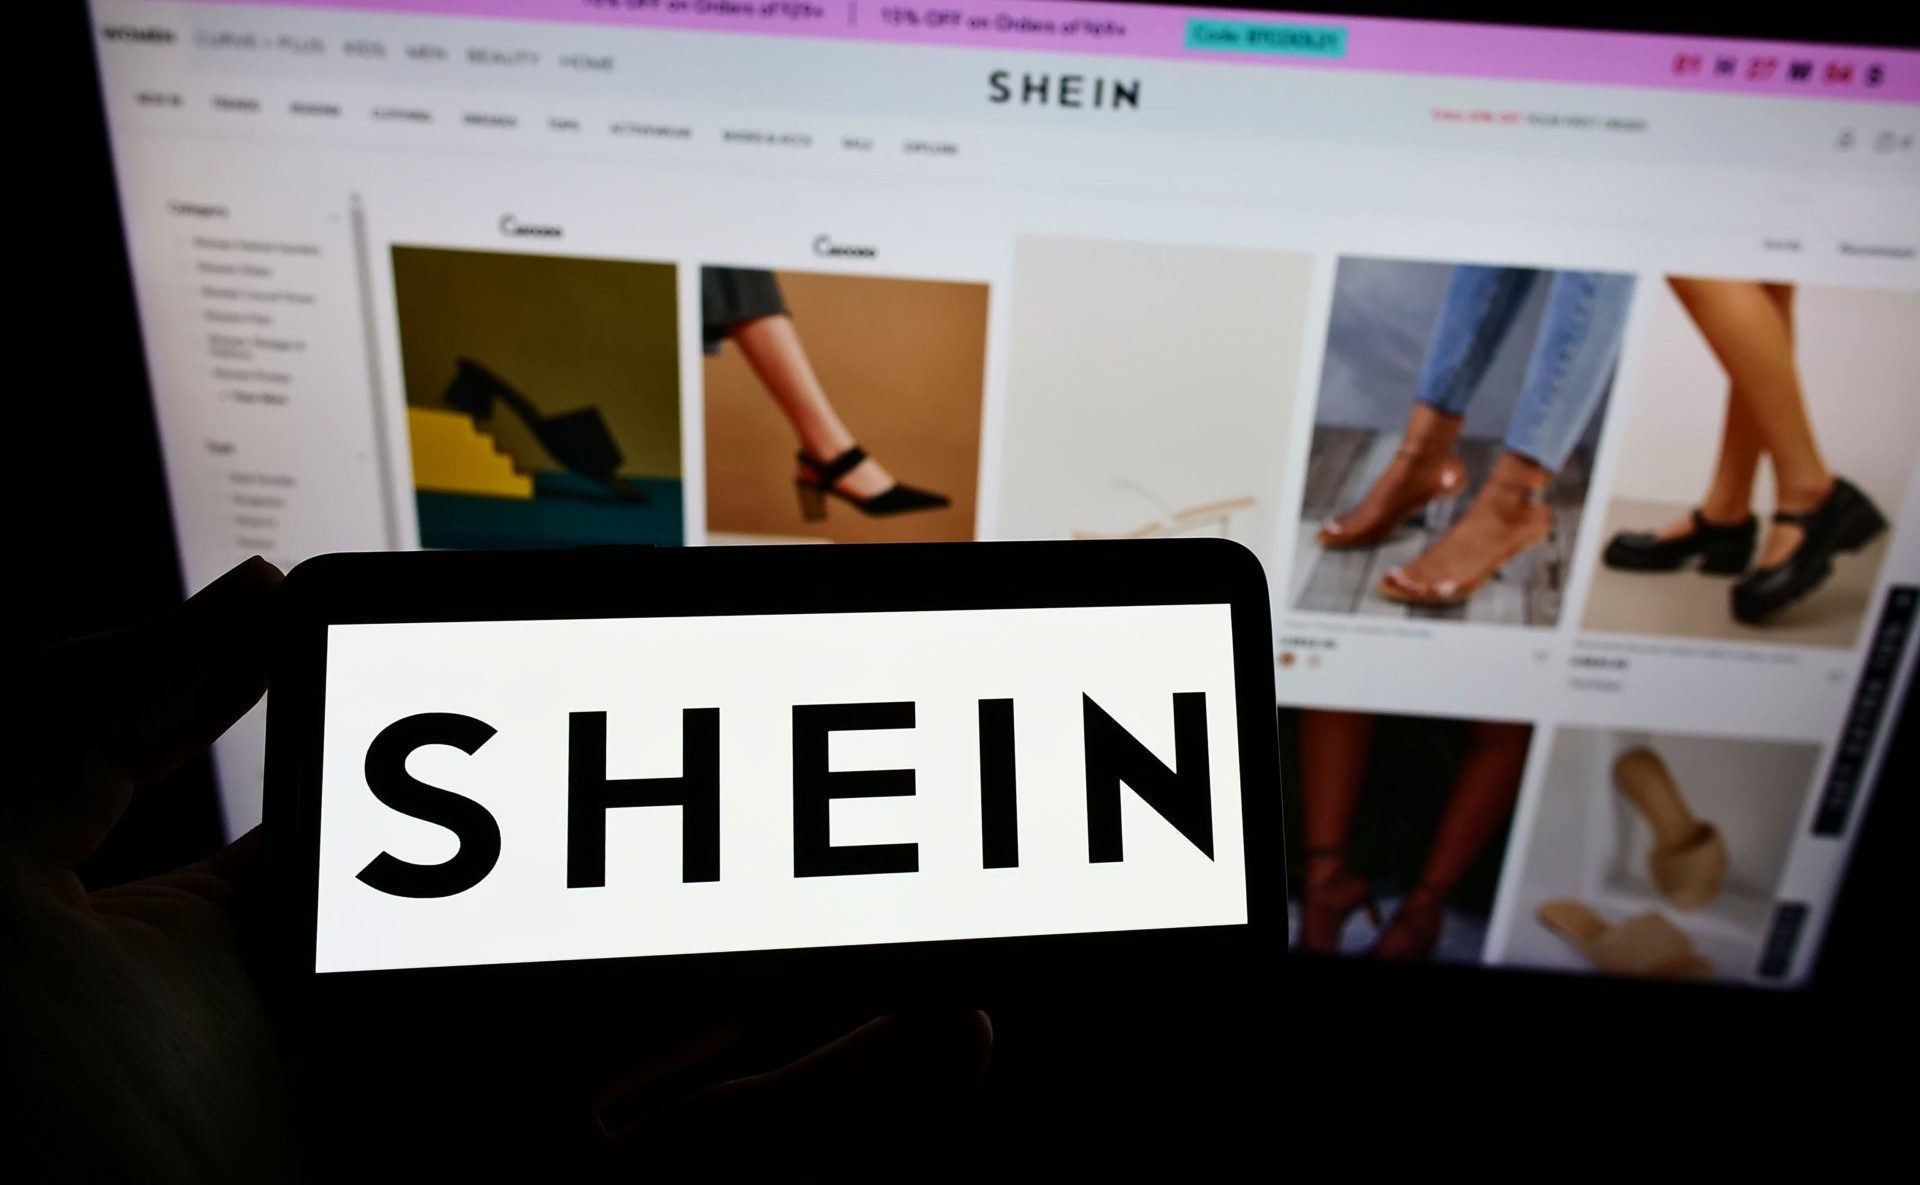 SHEIN’s new headquarters in Dublin puts ‘Ireland’s reputation on the ...